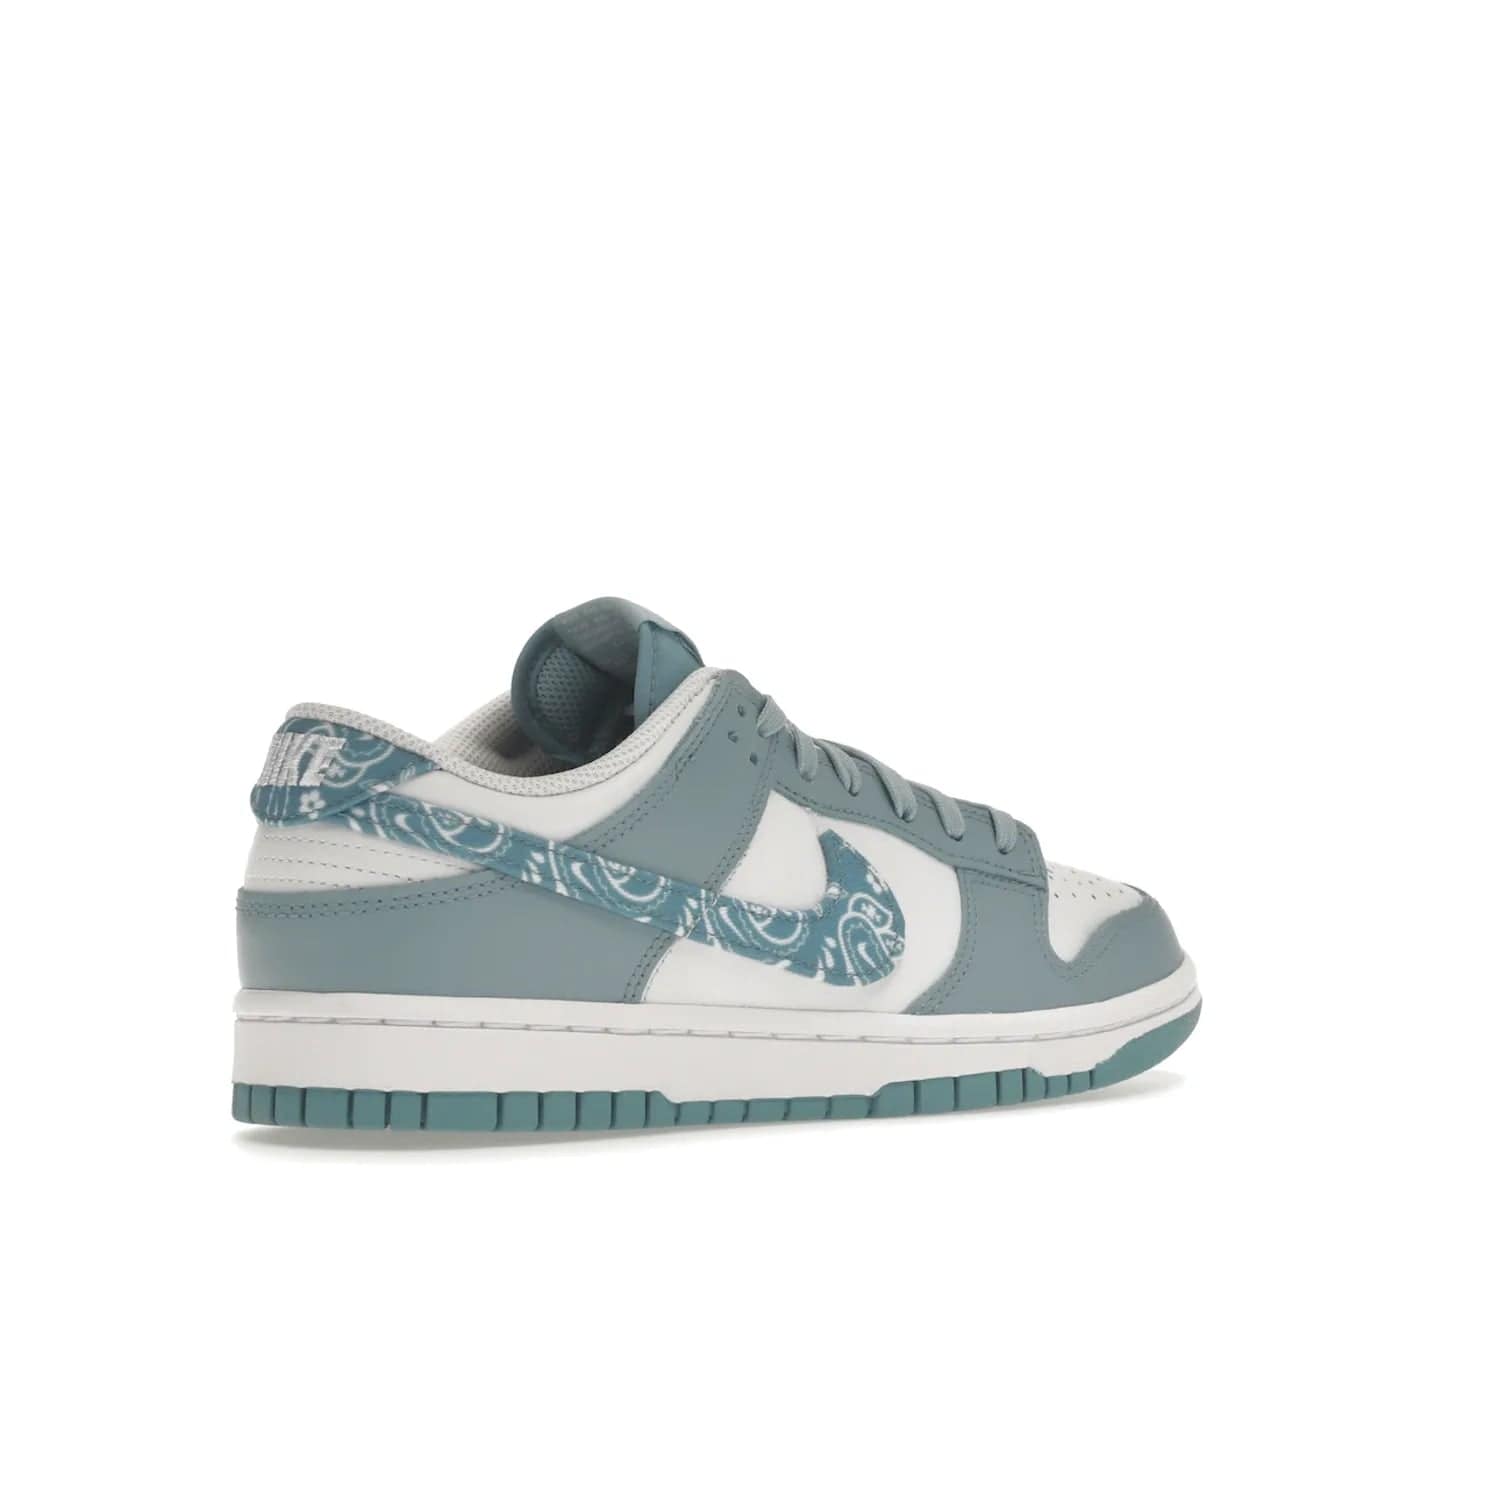 Nike Dunk Low Essential Paisley Pack Worn Blue (Women's) - Image 33 - Only at www.BallersClubKickz.com - Get the Nike Dunk Low Essential Paisley Pack Worn Blue (Women's) for style and comfort. White leather construction, light blue leather overlays, canvas Swooshes and matching heel tabs offer a rich blue hue. Finished by a white and light blue sole, this classic Nike Dunk is the perfect addition to any wardrobe. Released in March 2022.